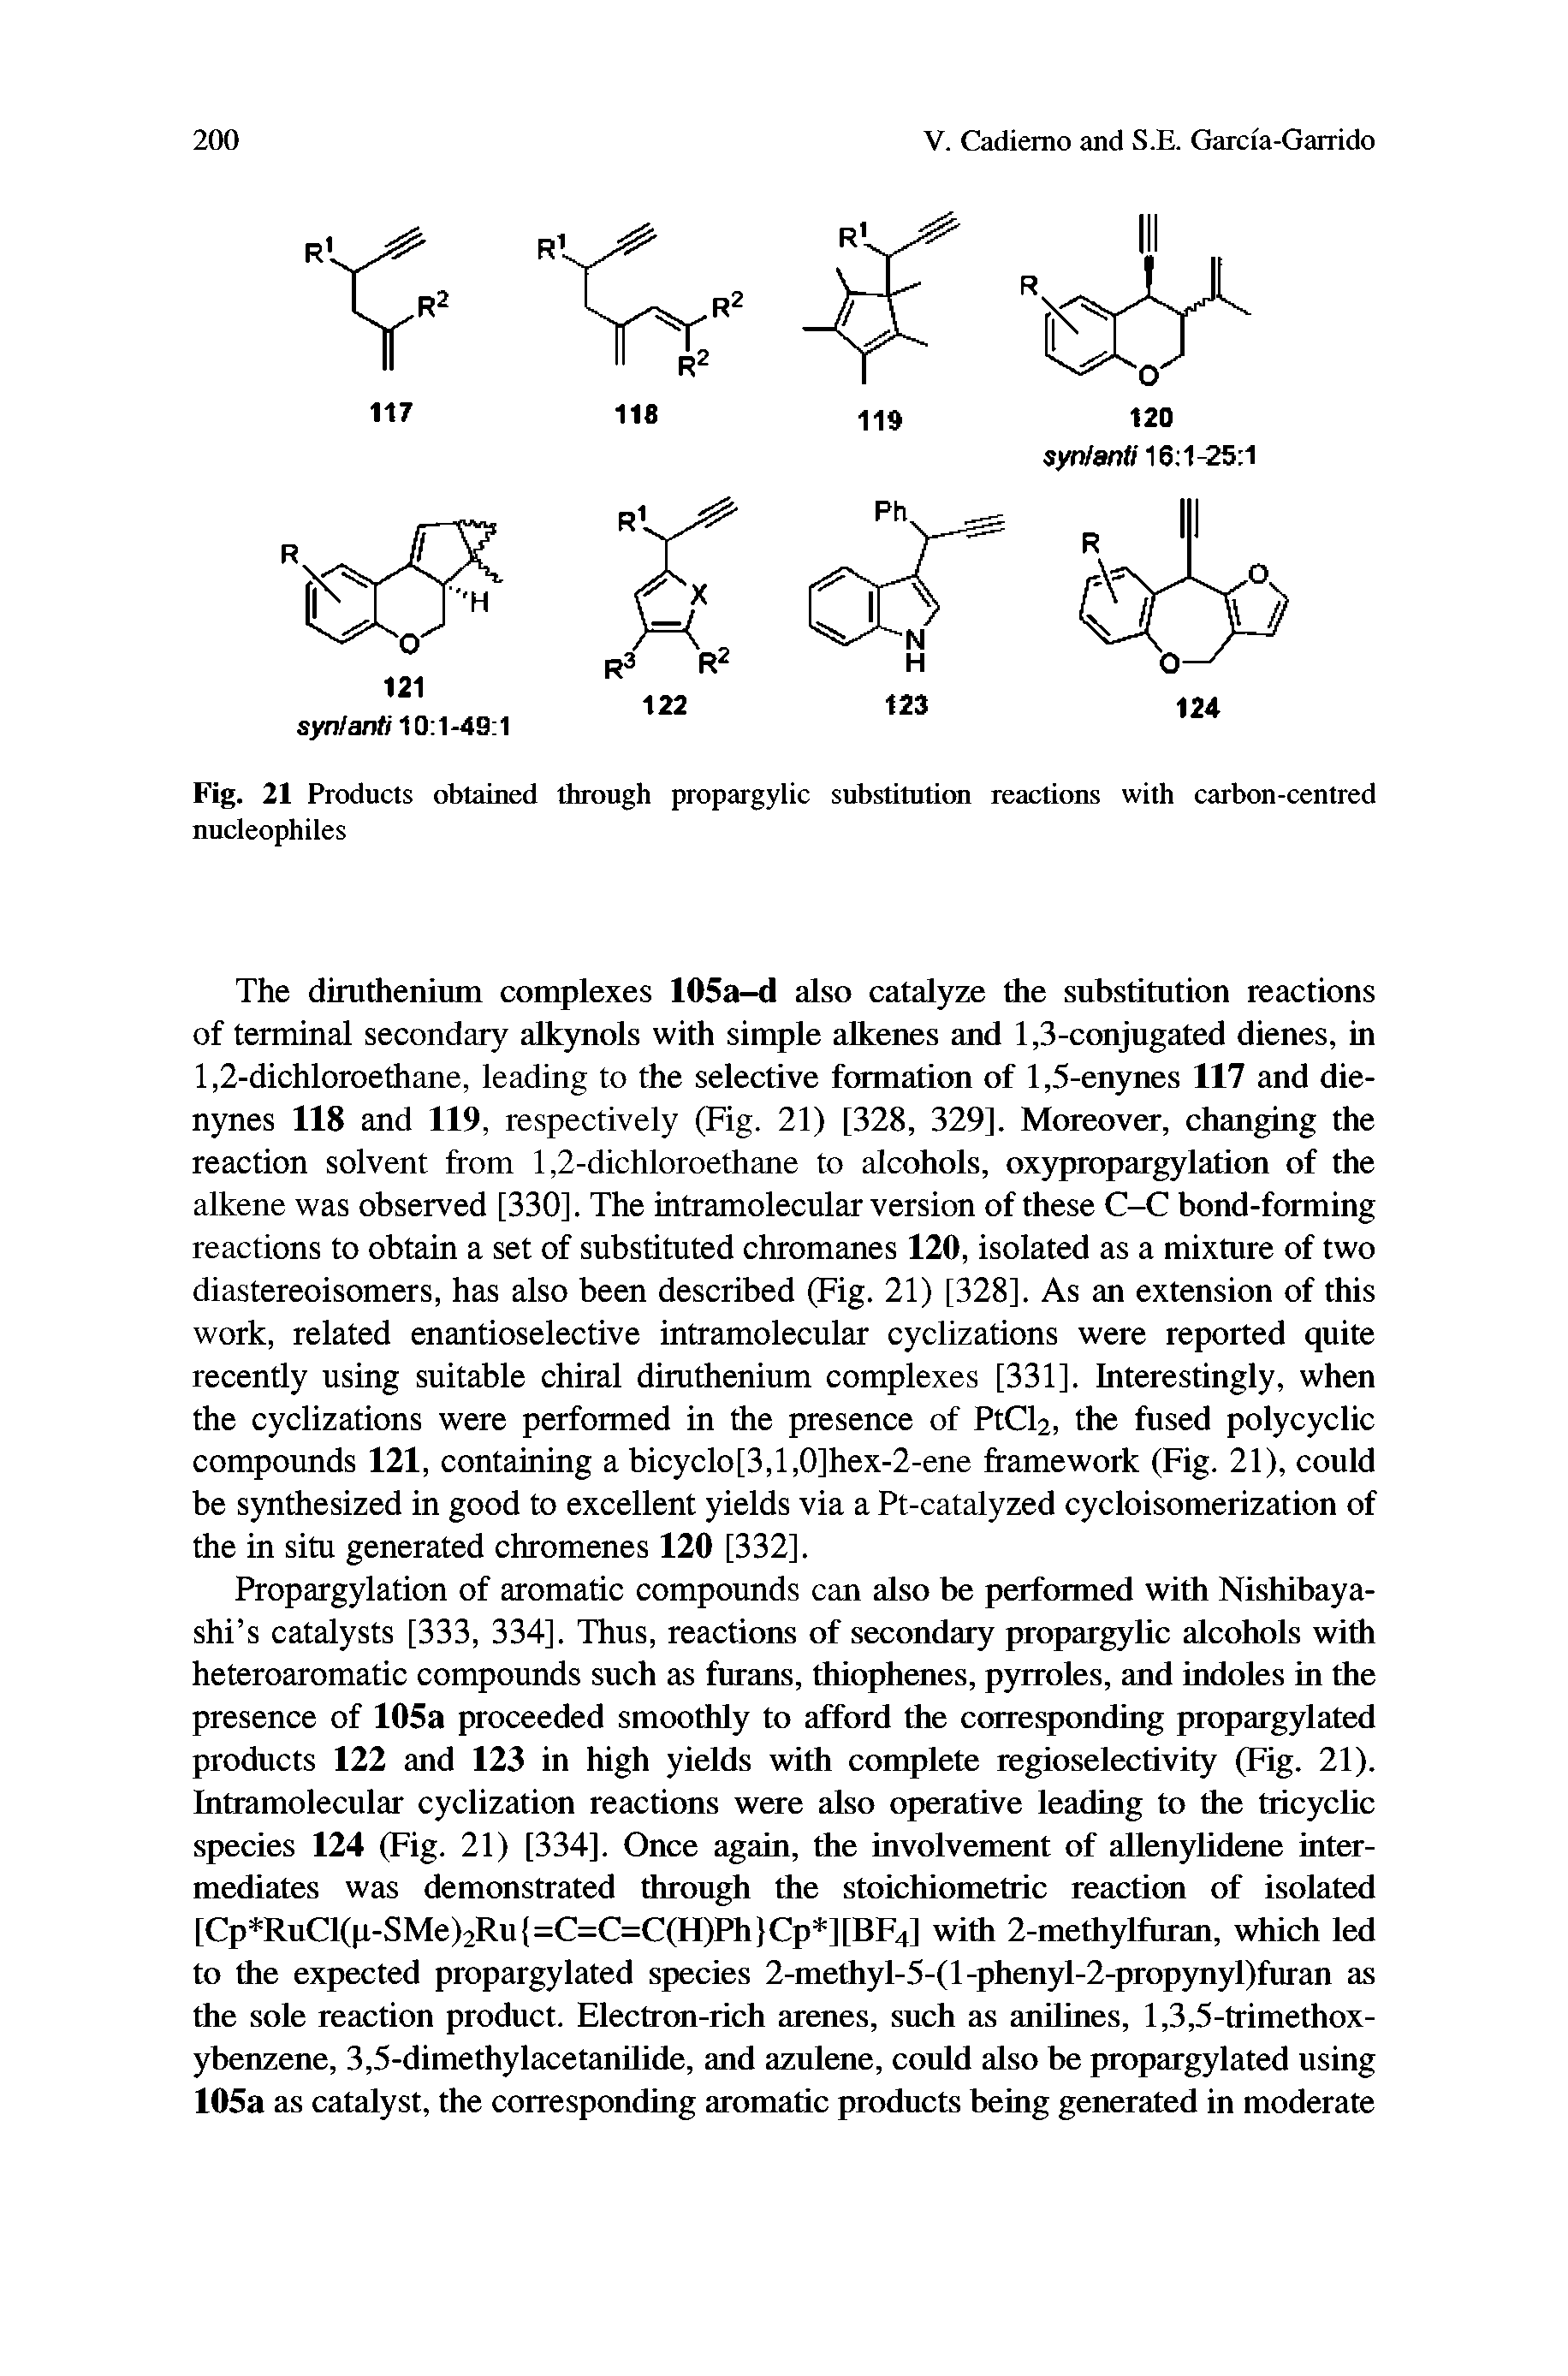 Fig. 21 Products obtained through propargylic substitution reactions with carbon-centred nucleophiles...